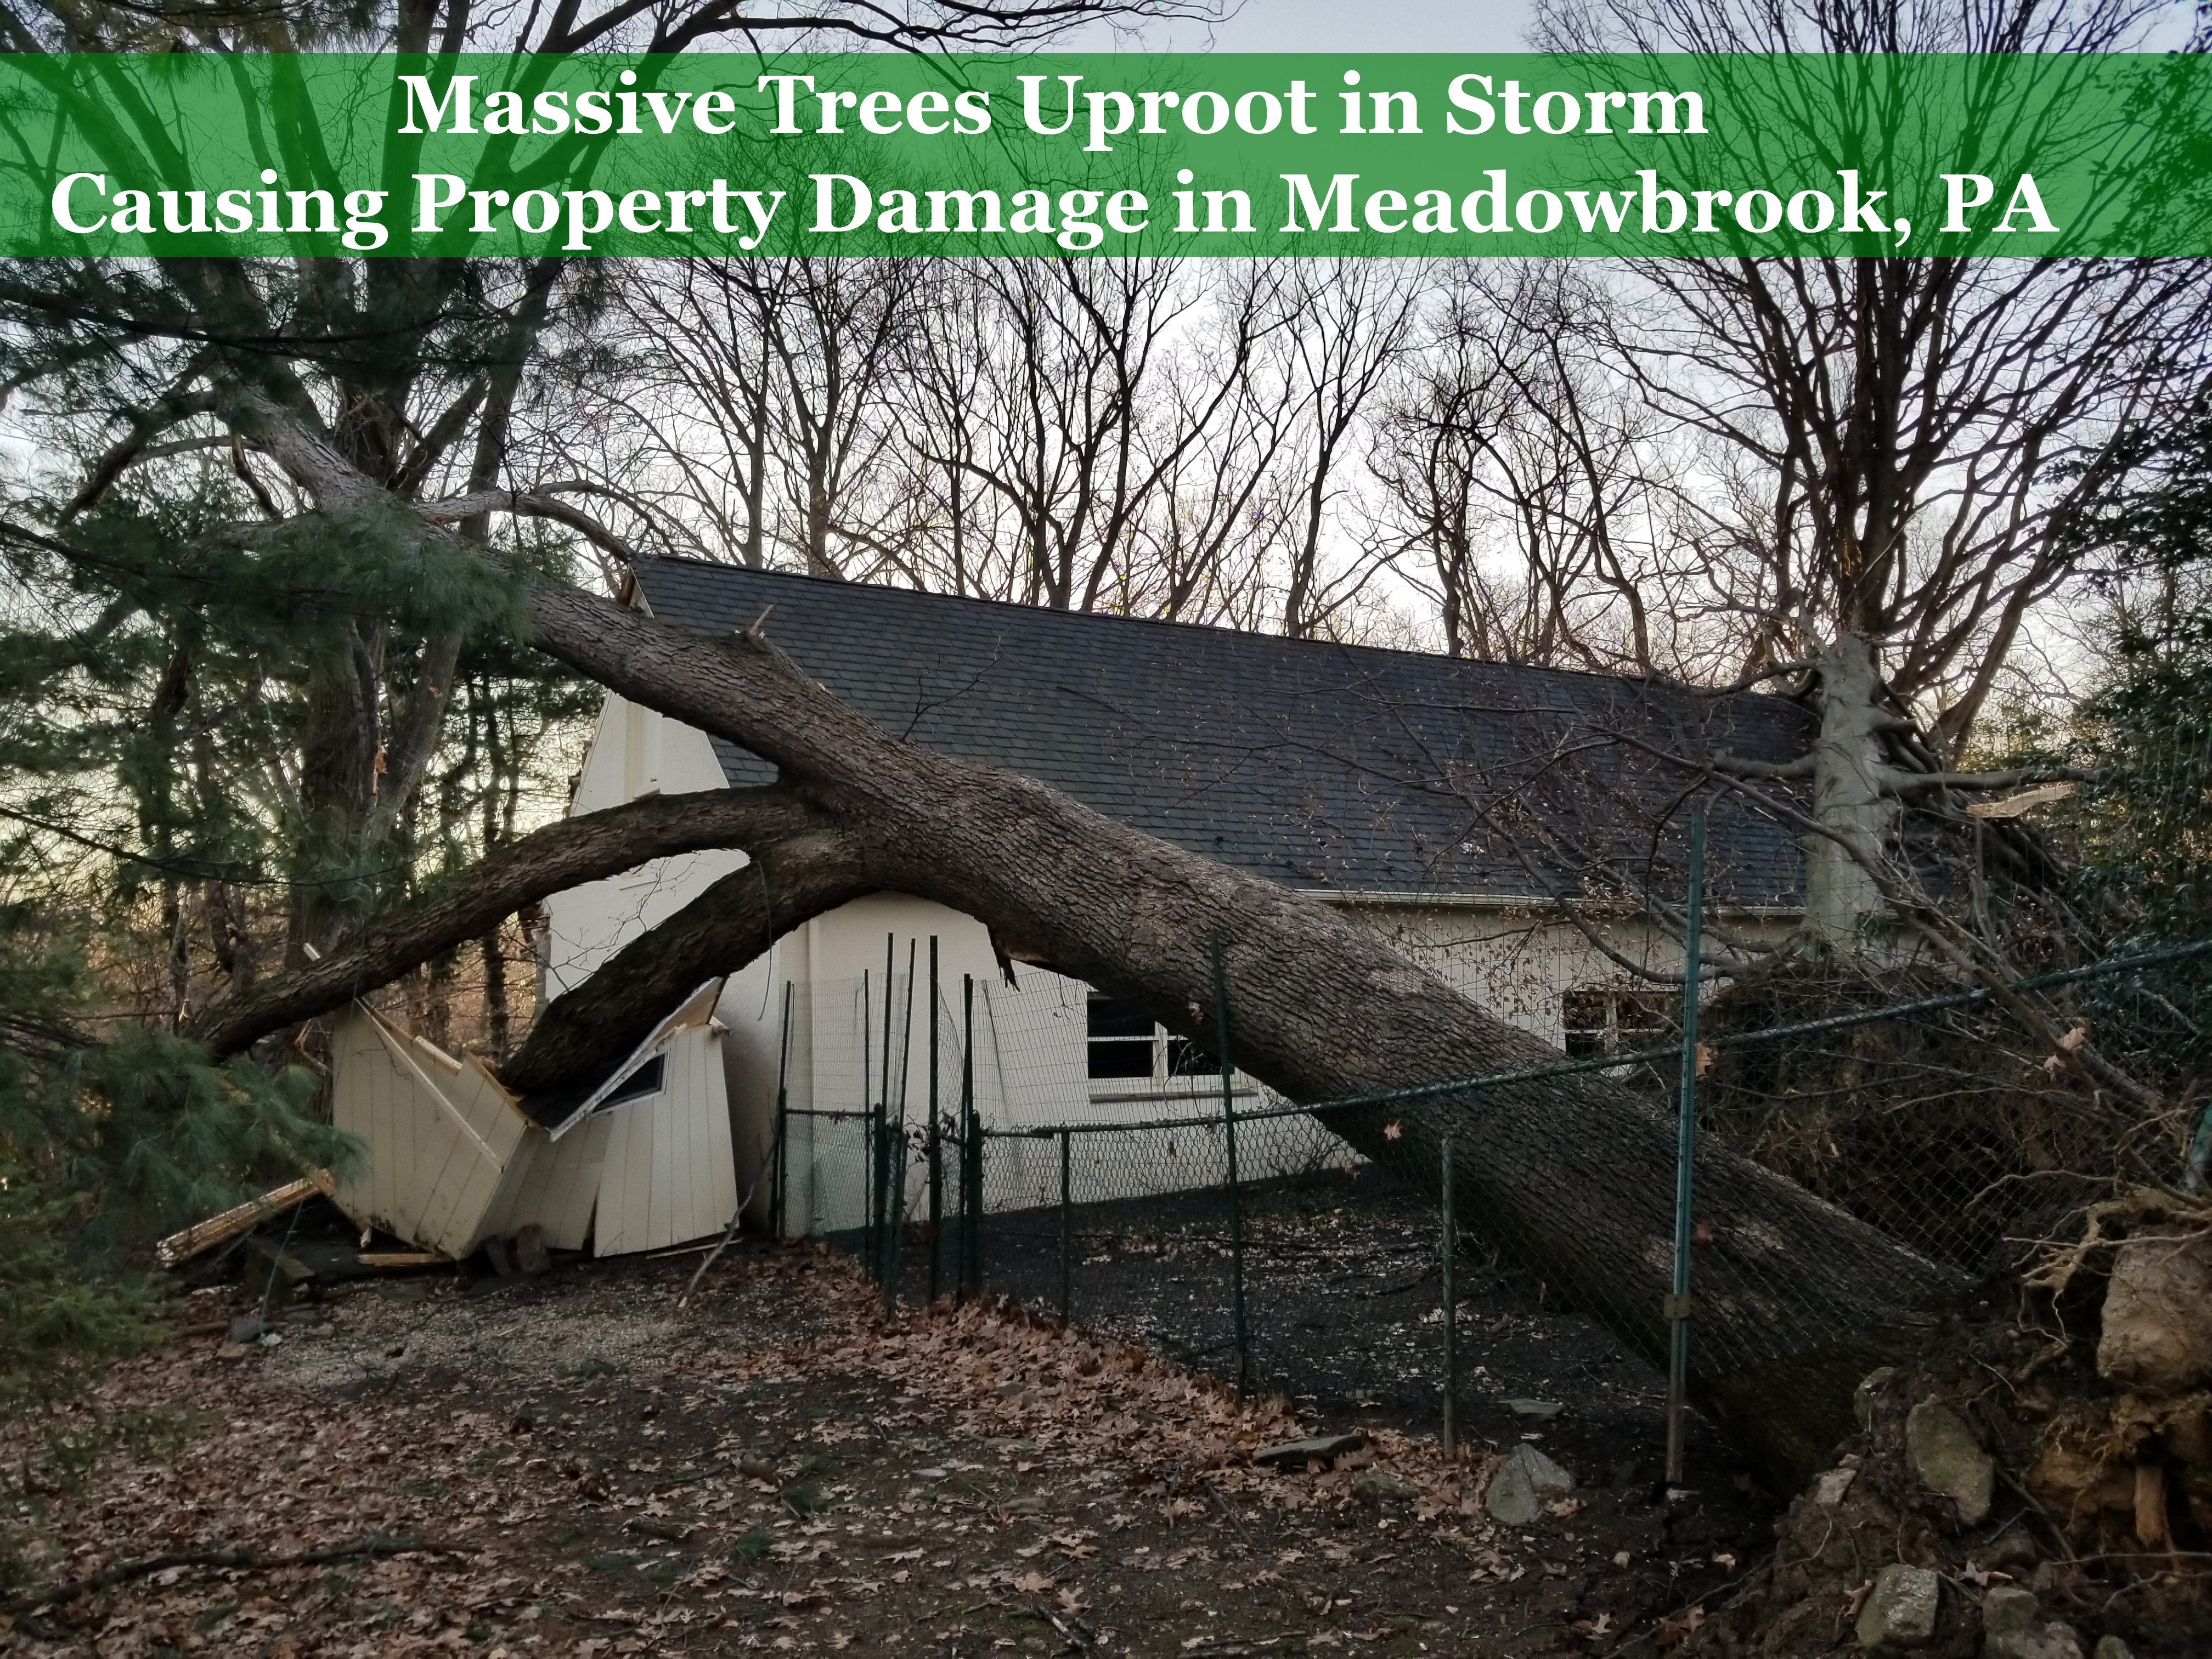 Massive Trees Uproot in Storm Causing Property Damage in Meadowbrook PA 